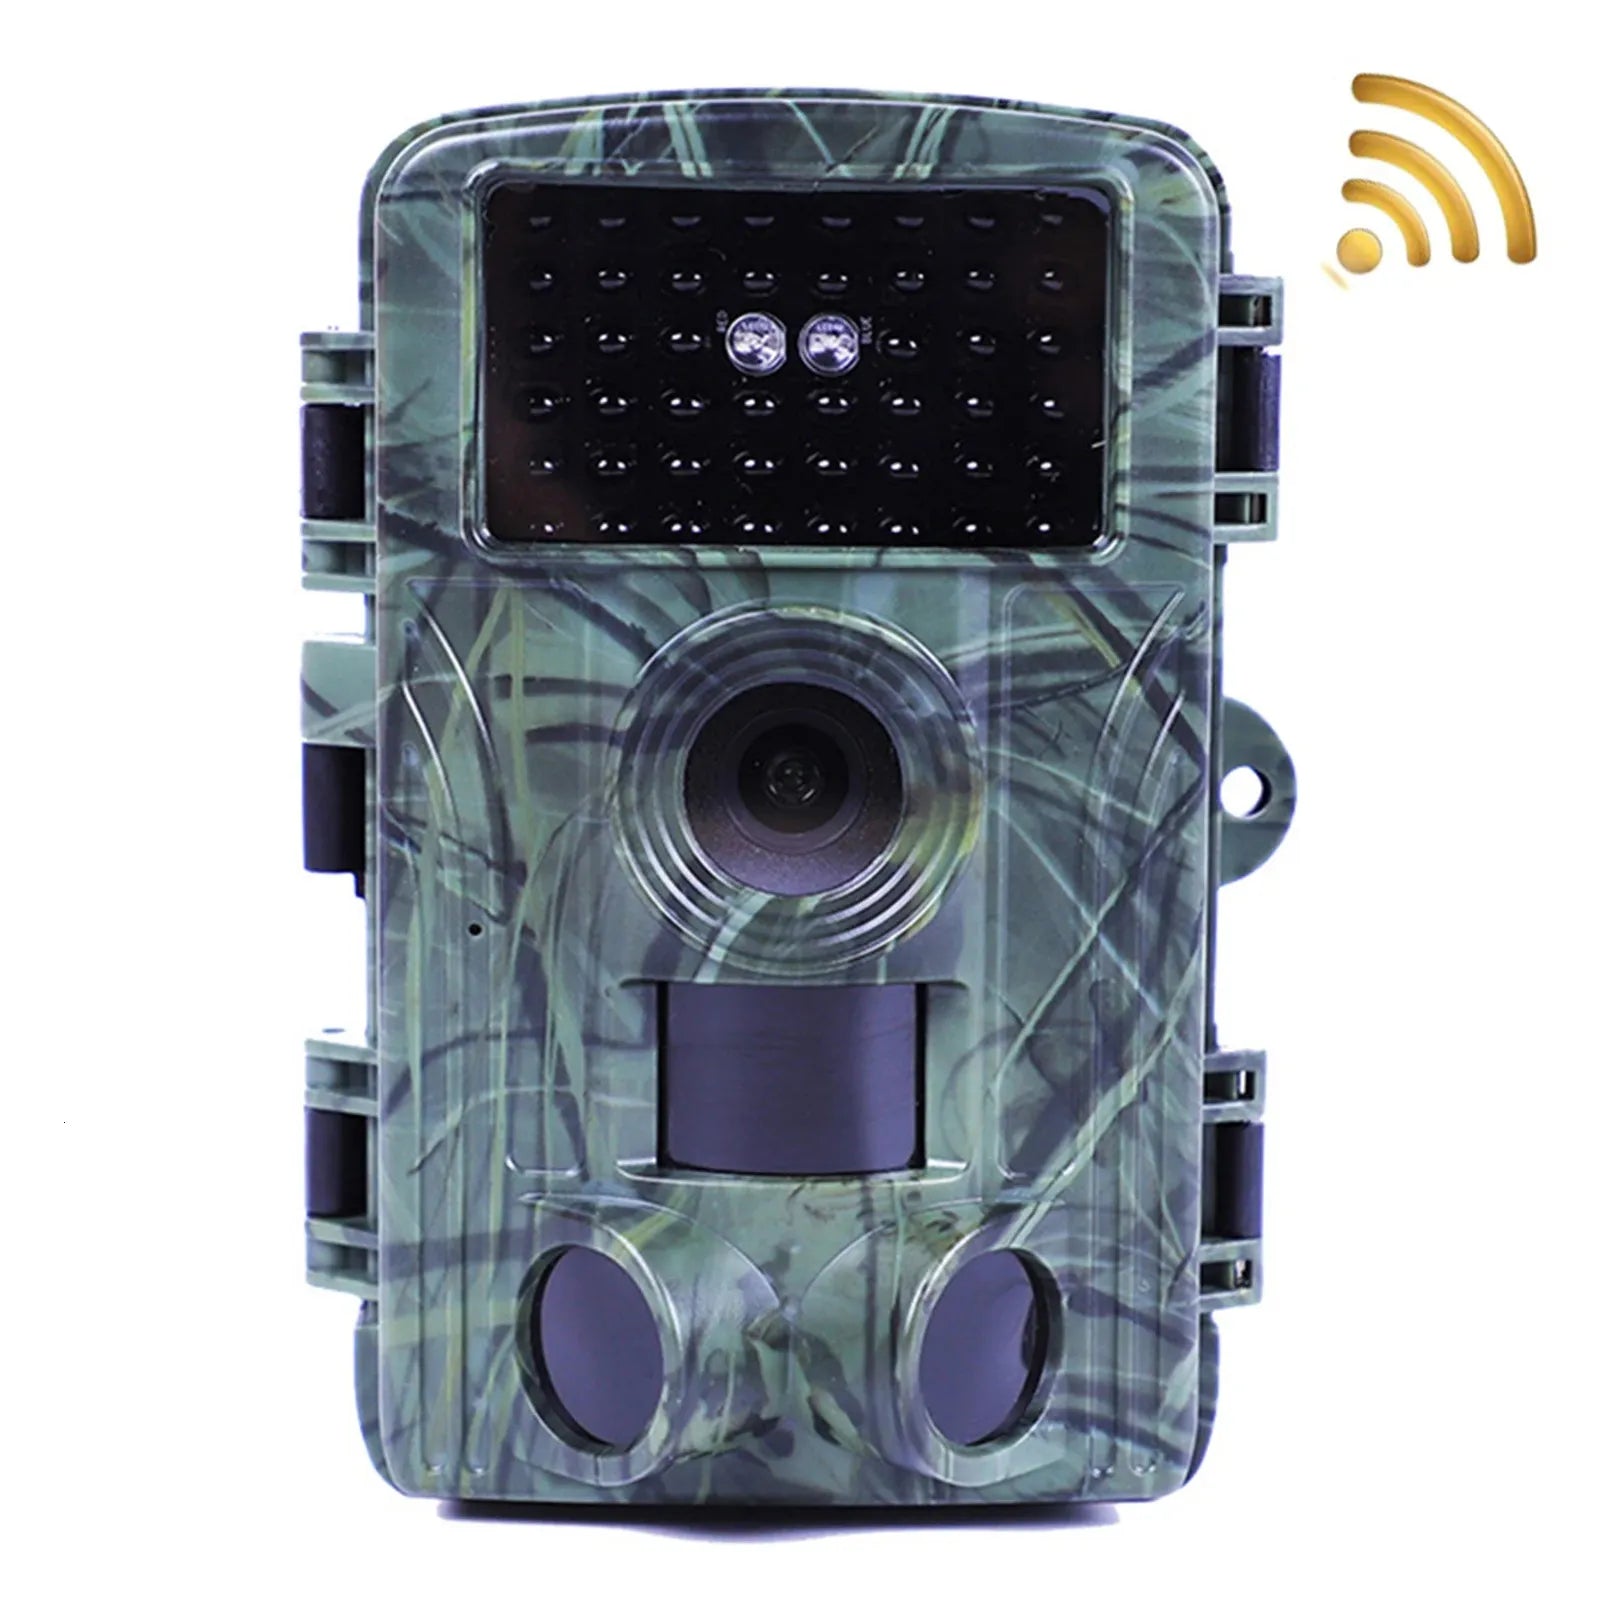 Enhance your hunting experience with the best trail camera for hunting, featuring advanced night vision wifi security camera technology for superior monitoring.